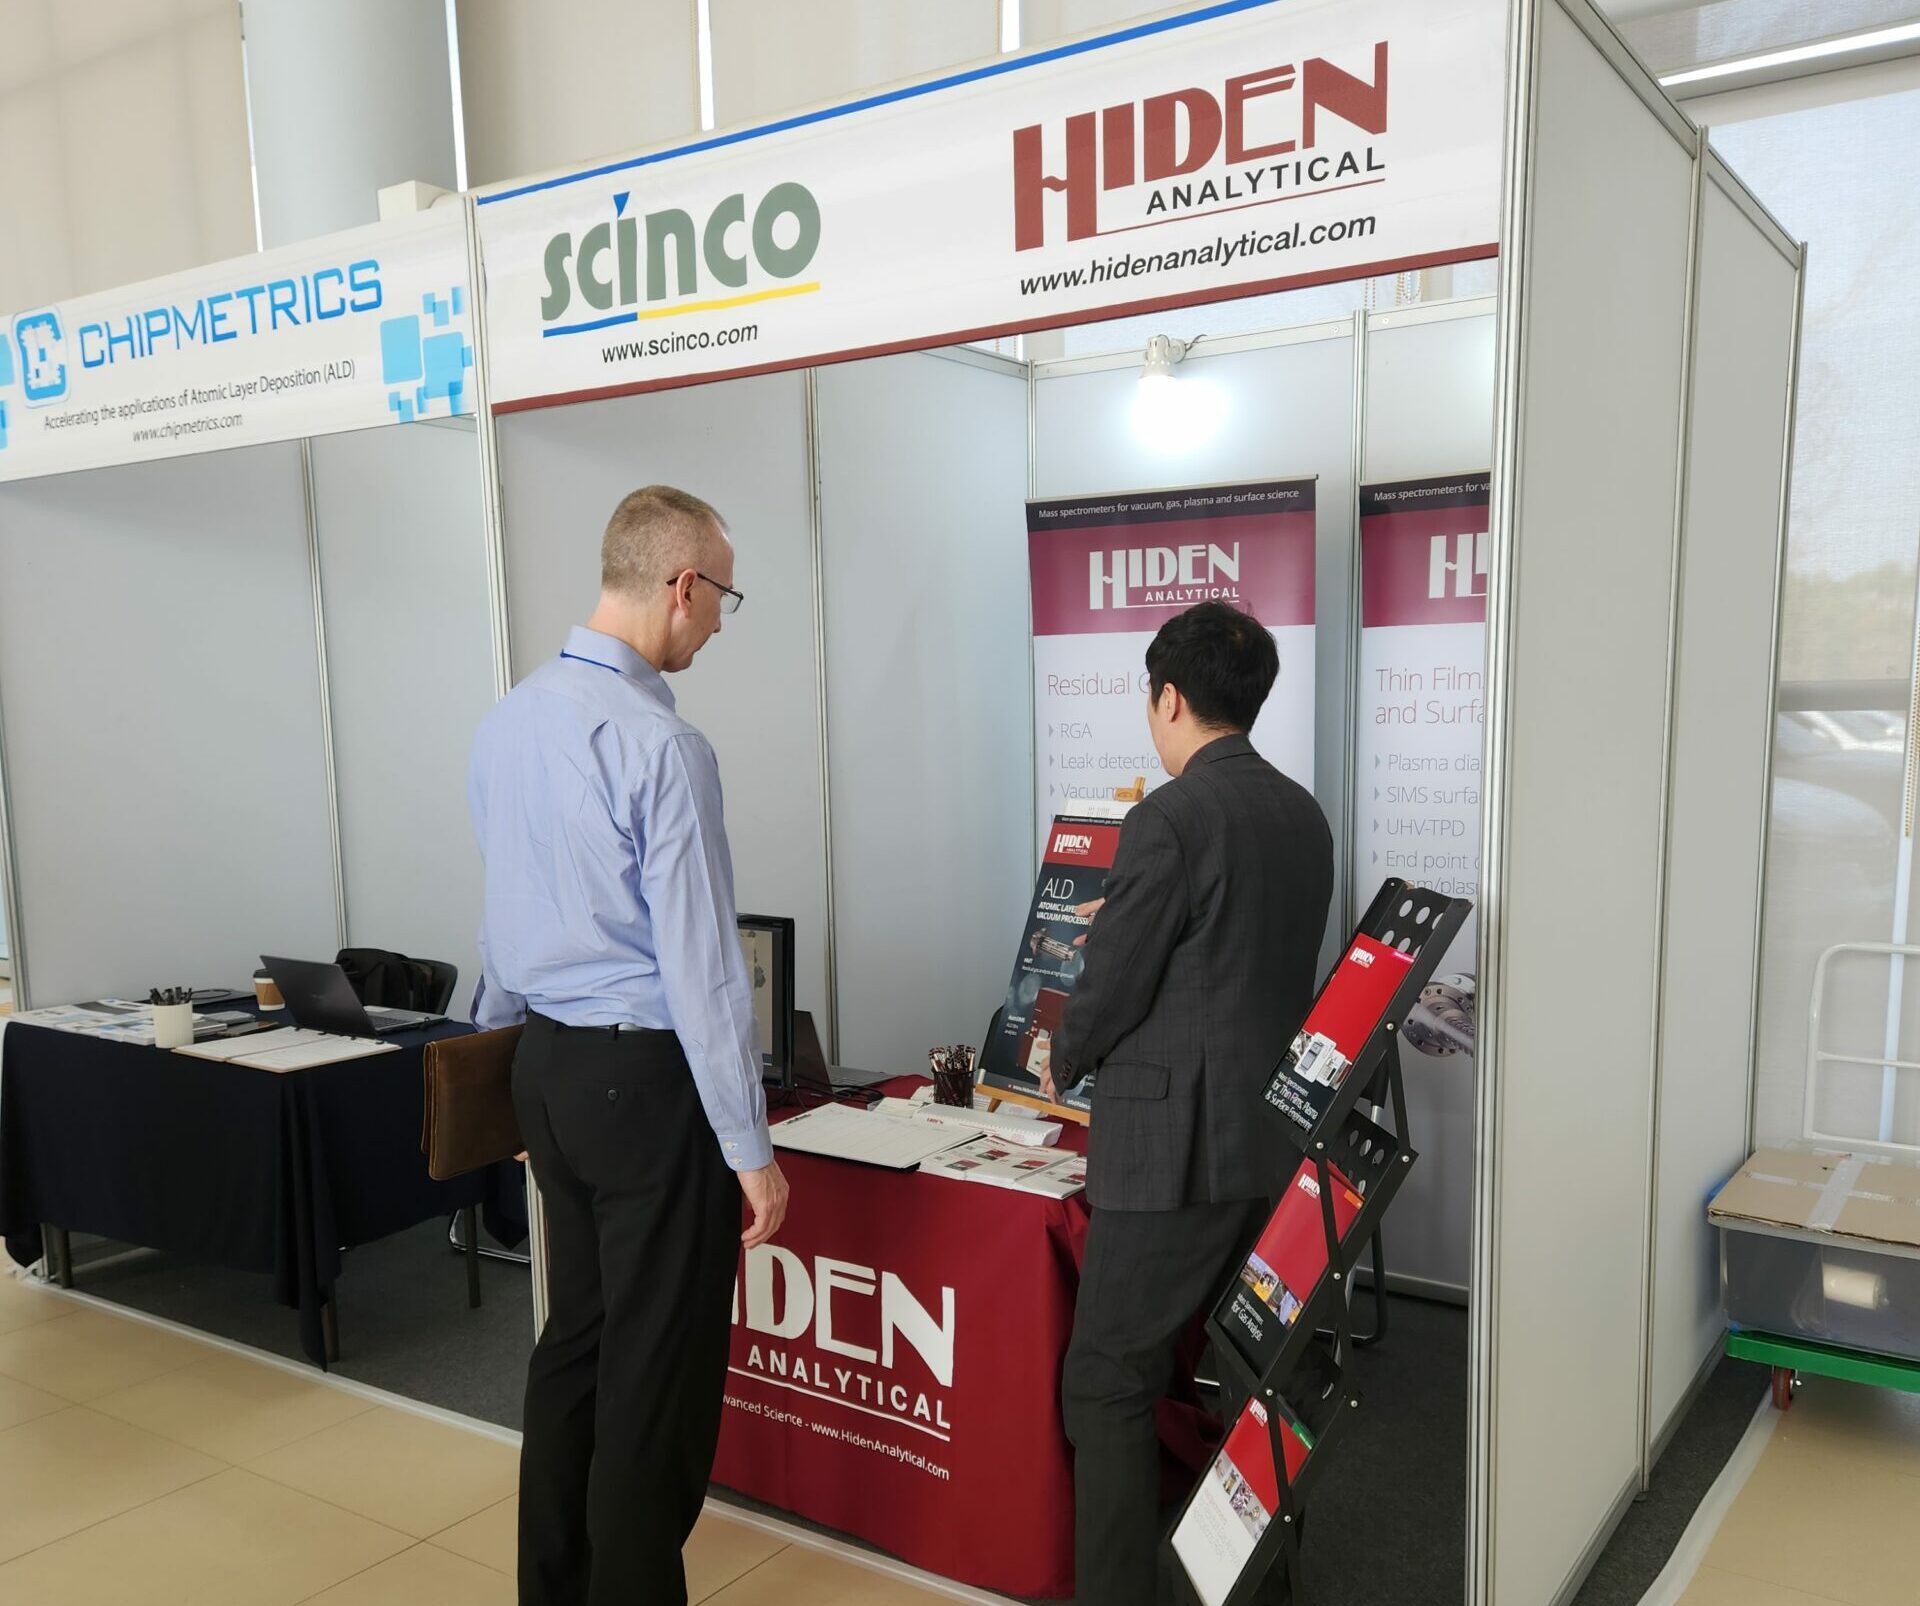 hiden analytical (scinco) stand at ASD23